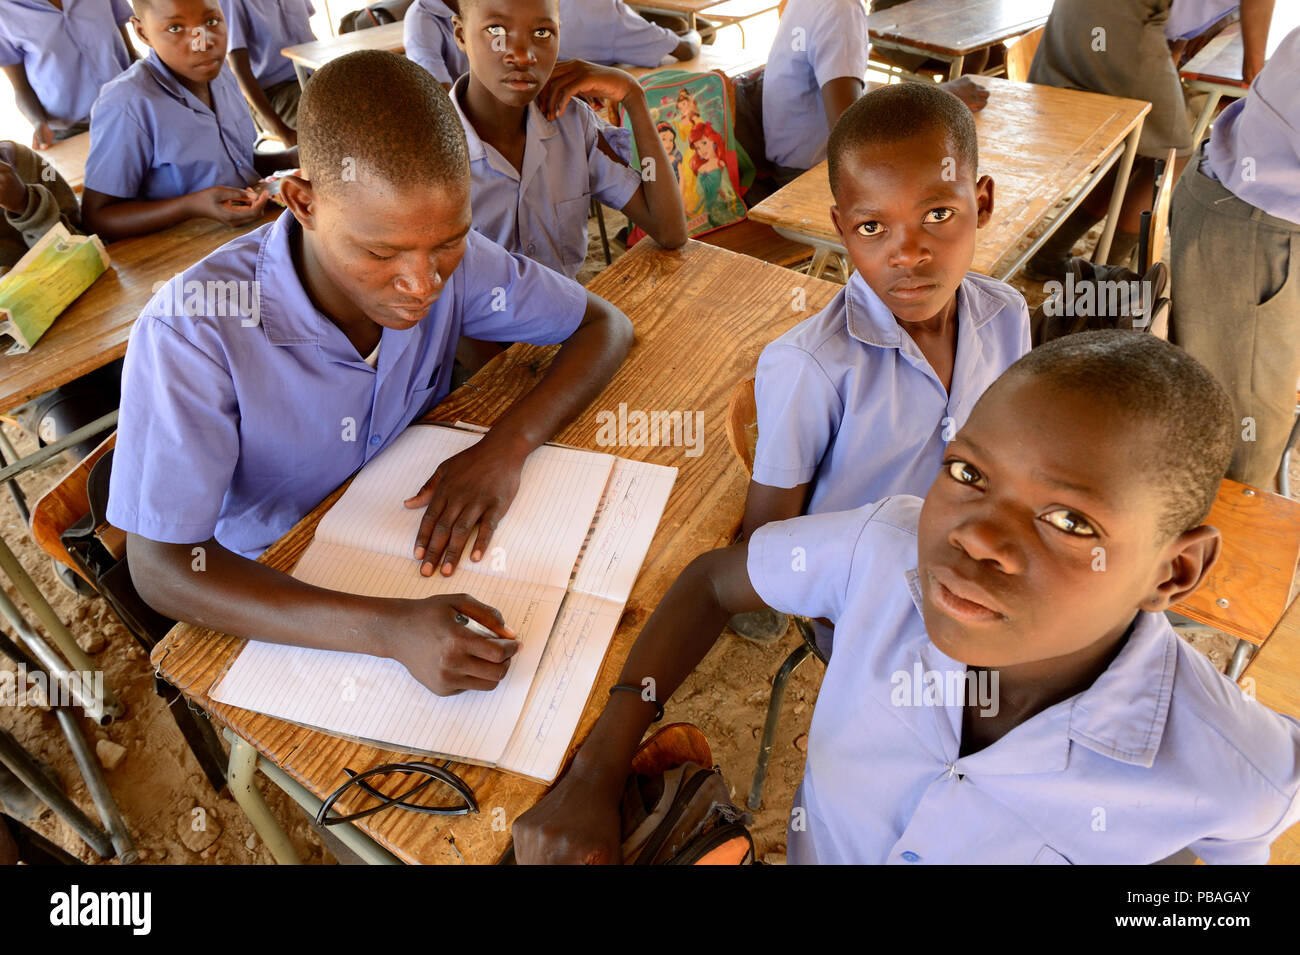 Students of different ages studying in the same class, Etanga School, Kaokoland, Namibia. October 2015 Stock Photo